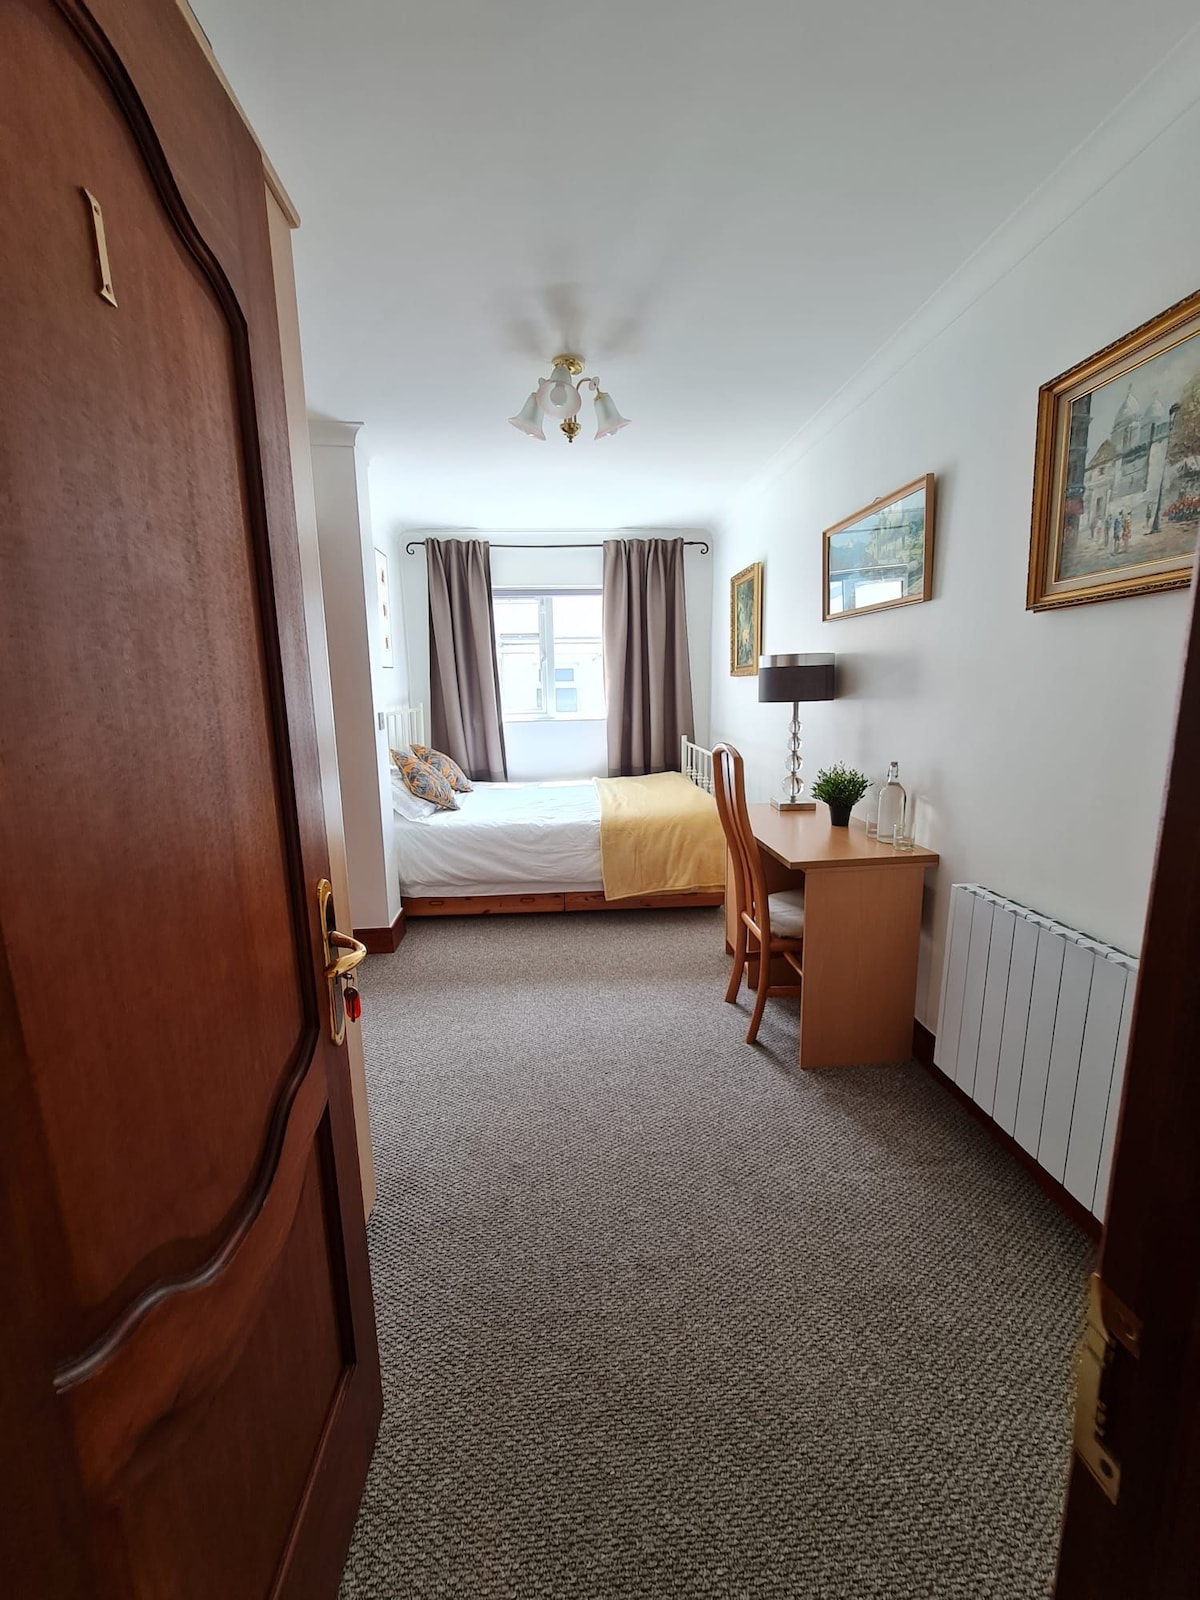 Private Double Room w/ Ensuite and FREE parking